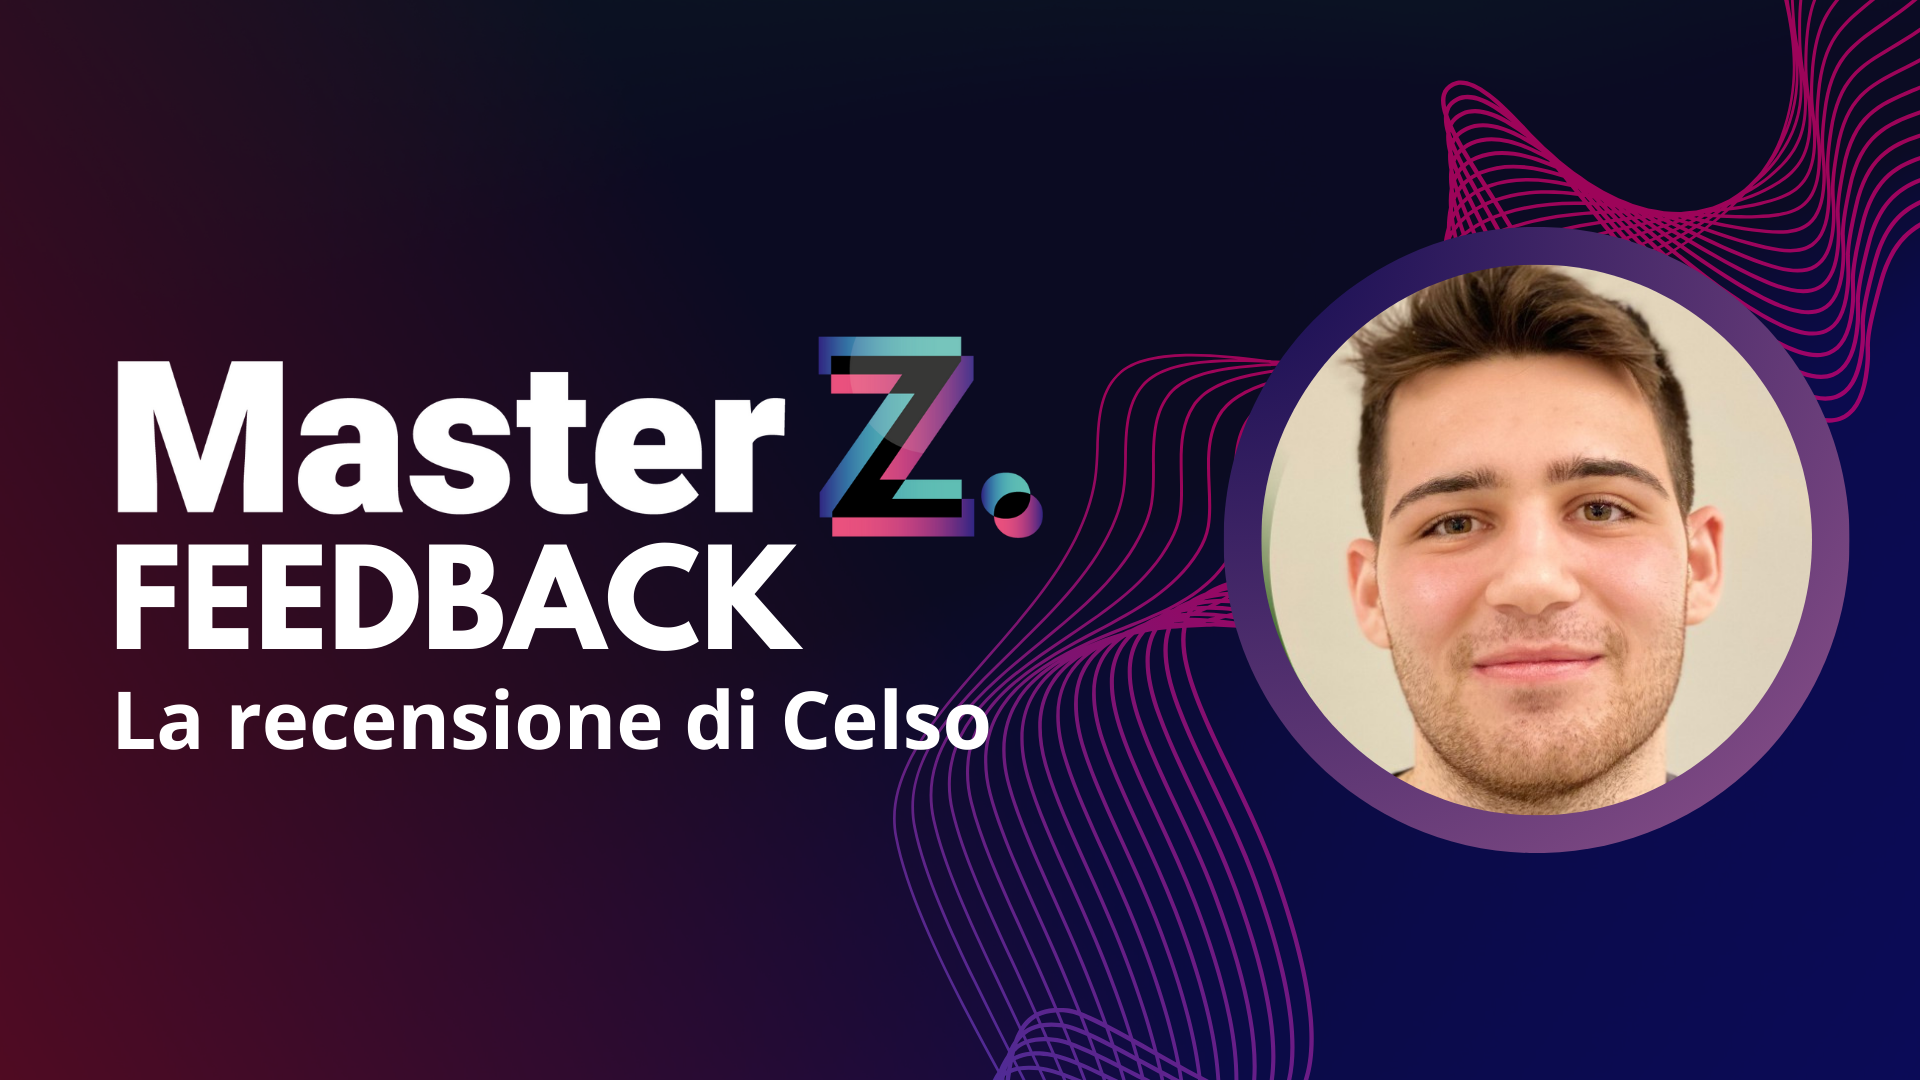 MasterZ Recensioni Celso